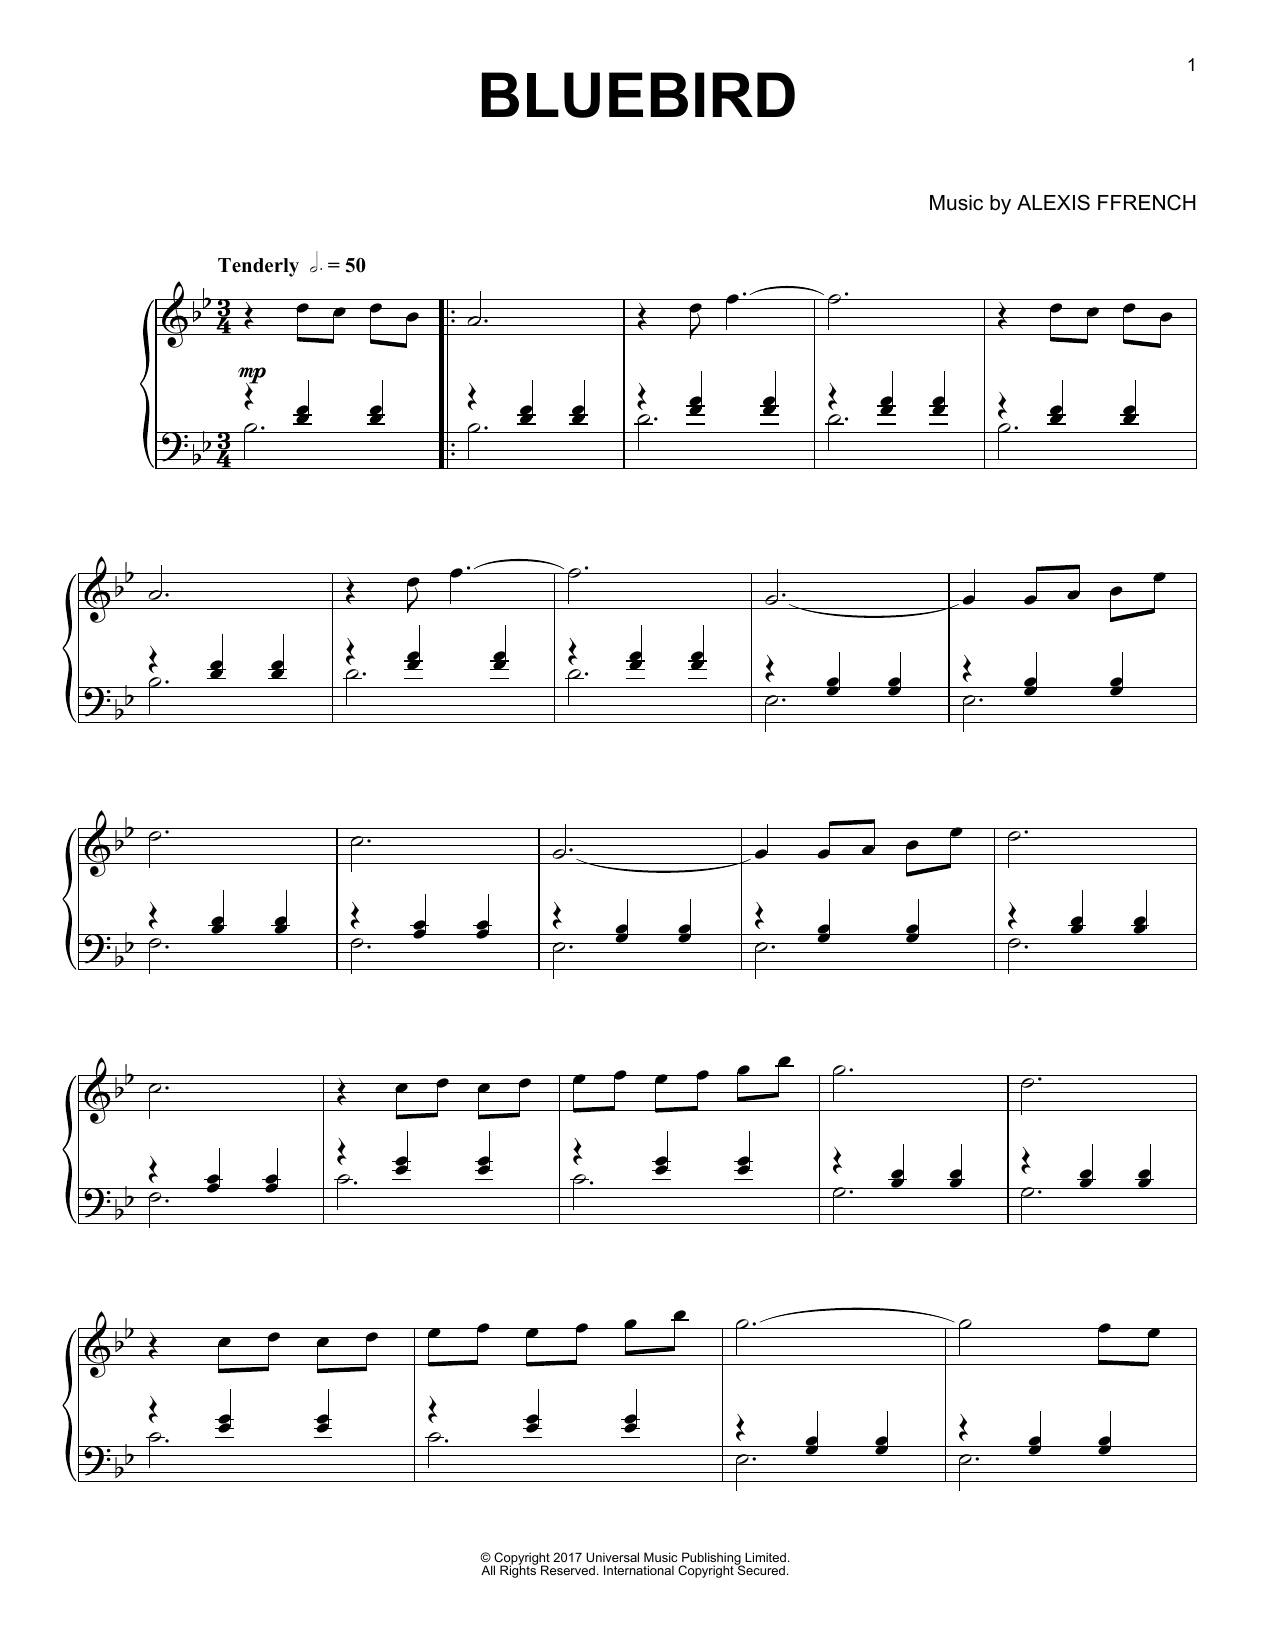 Alexis Ffrench "Bluebird" Sheet Music PDF Notes, Chords ...